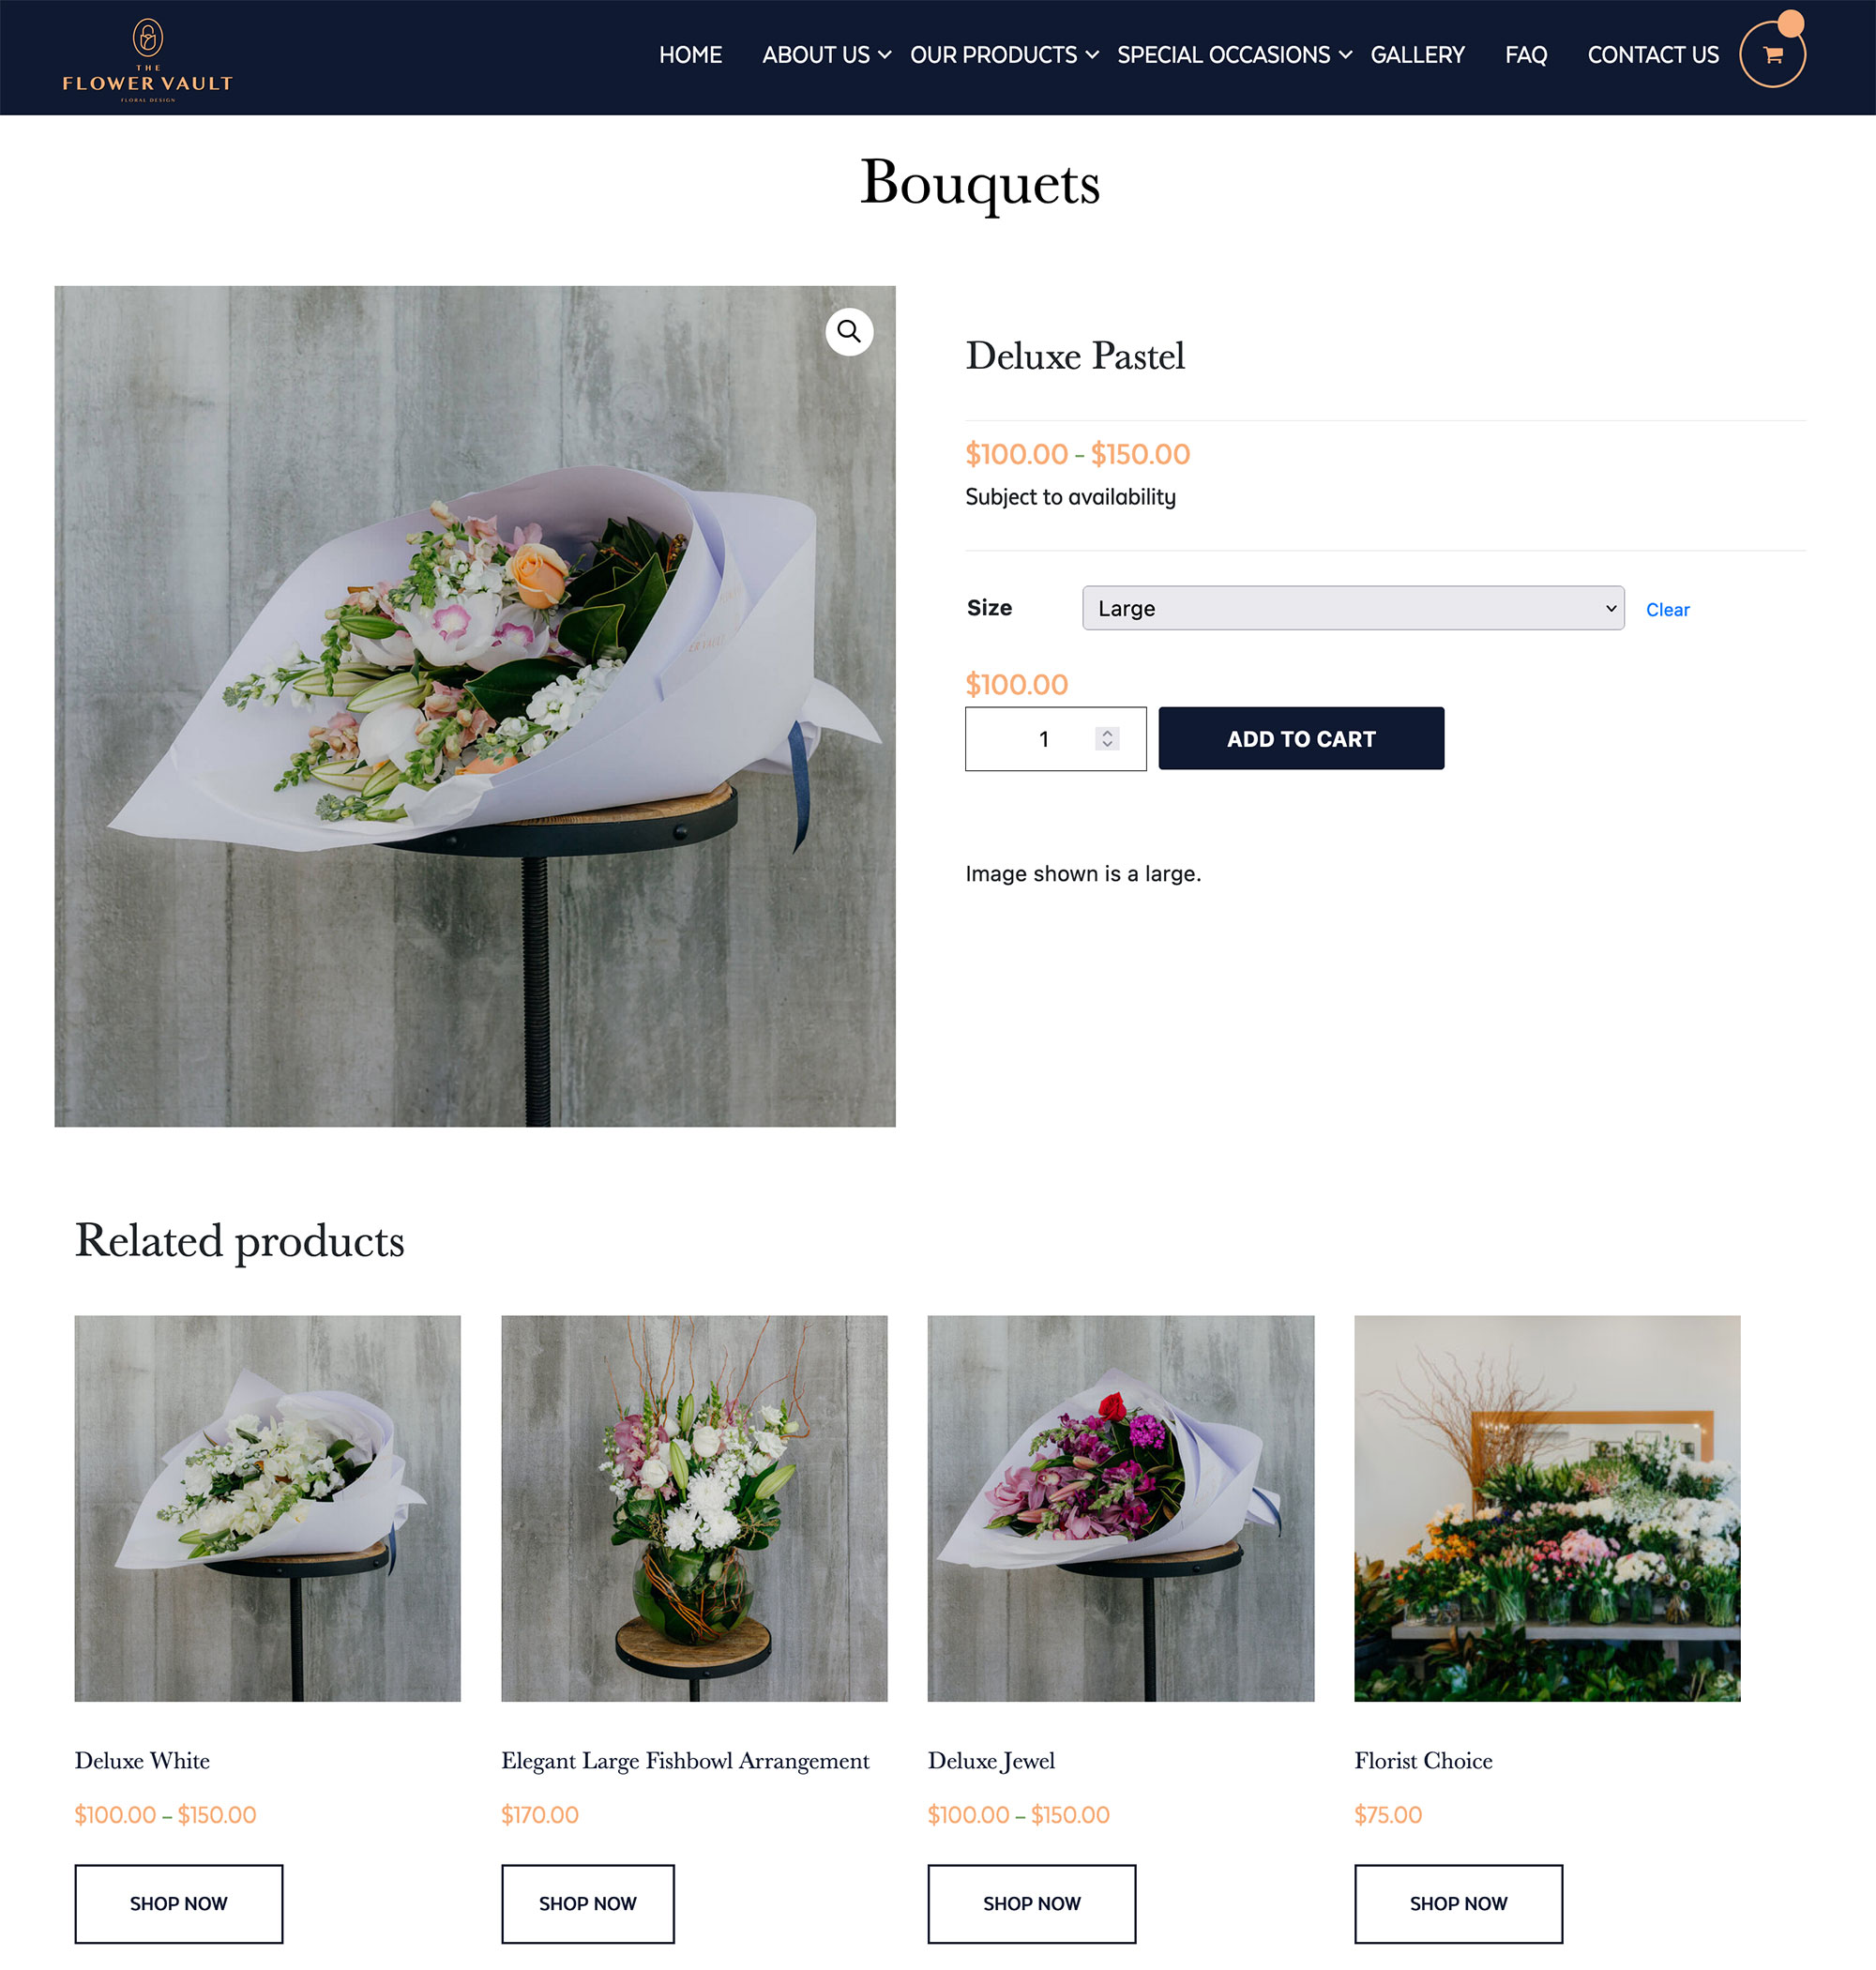 A bouquet of flowers by Auckland florist The Flower Vault website for online shopping commercial photos by Sarah Weber Photography in Hobsonville